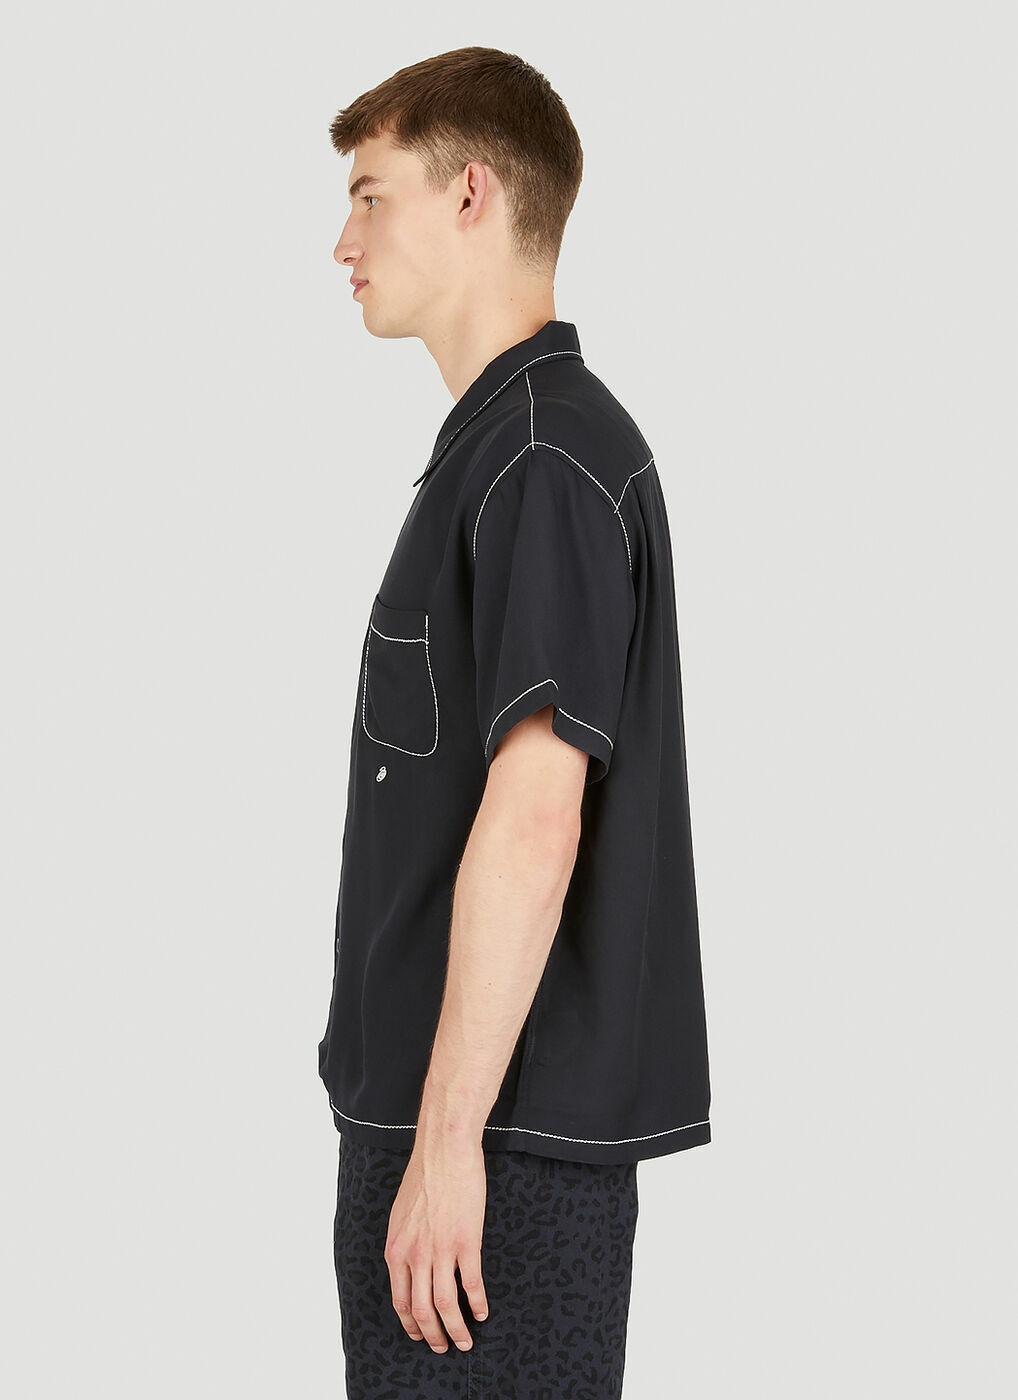 Contrast Pick Stitched Shirt in Black Stussy